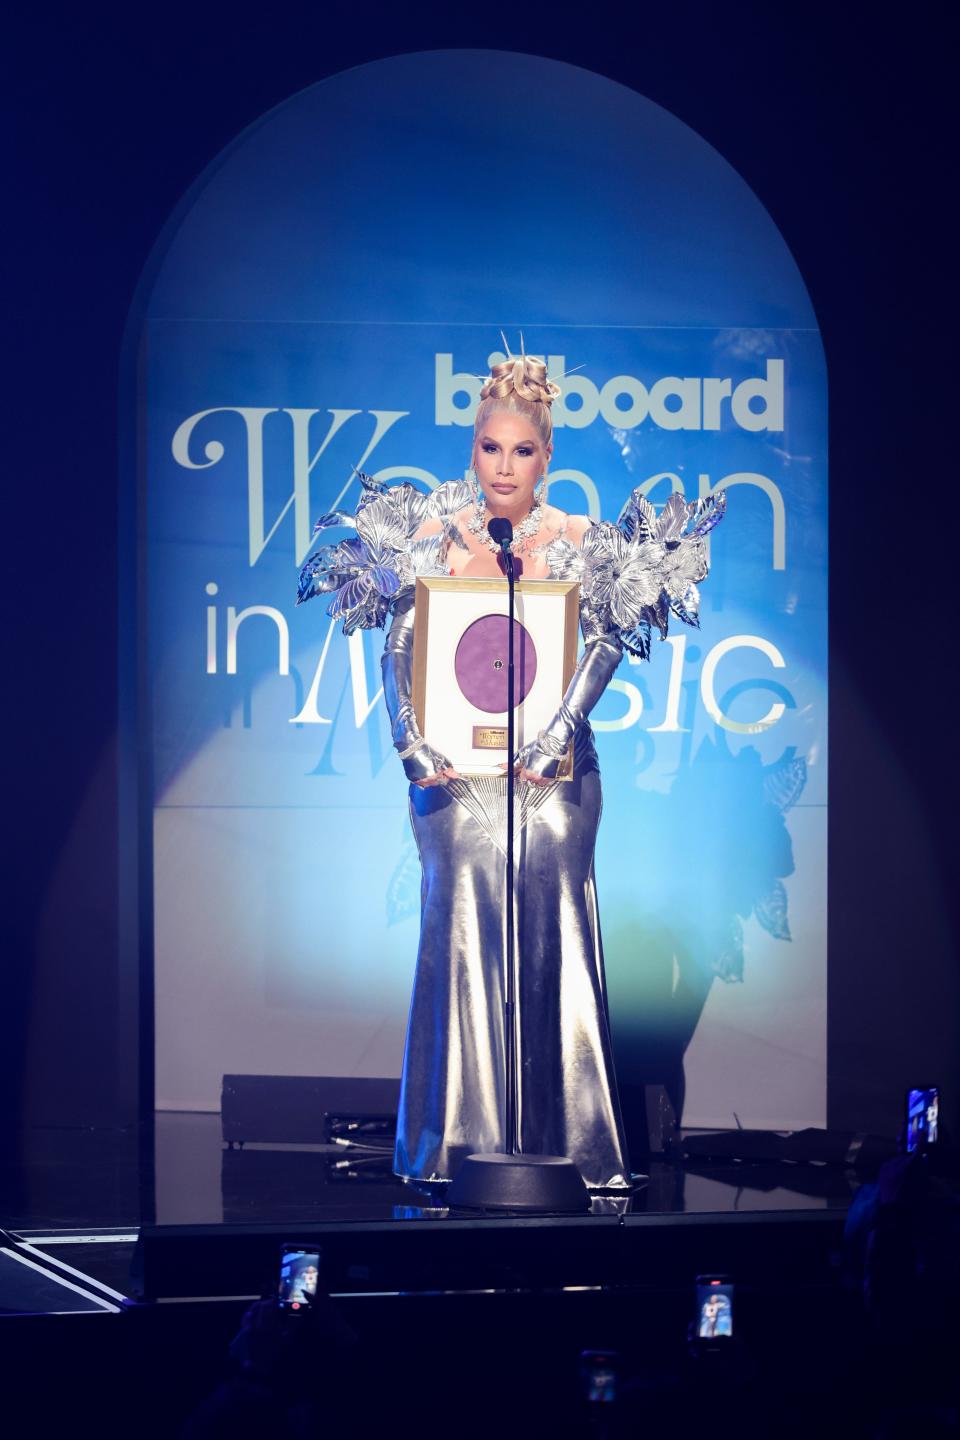 Reggaeton pioneer Ivy Queen accepted the Icon Award onstage at 2023's Billboad Women in Music event on March 3. To accept the award, she gave an empowering speech and encouraged other Latina artists to stand up for themselves and "not to stay quiet when something hurts."